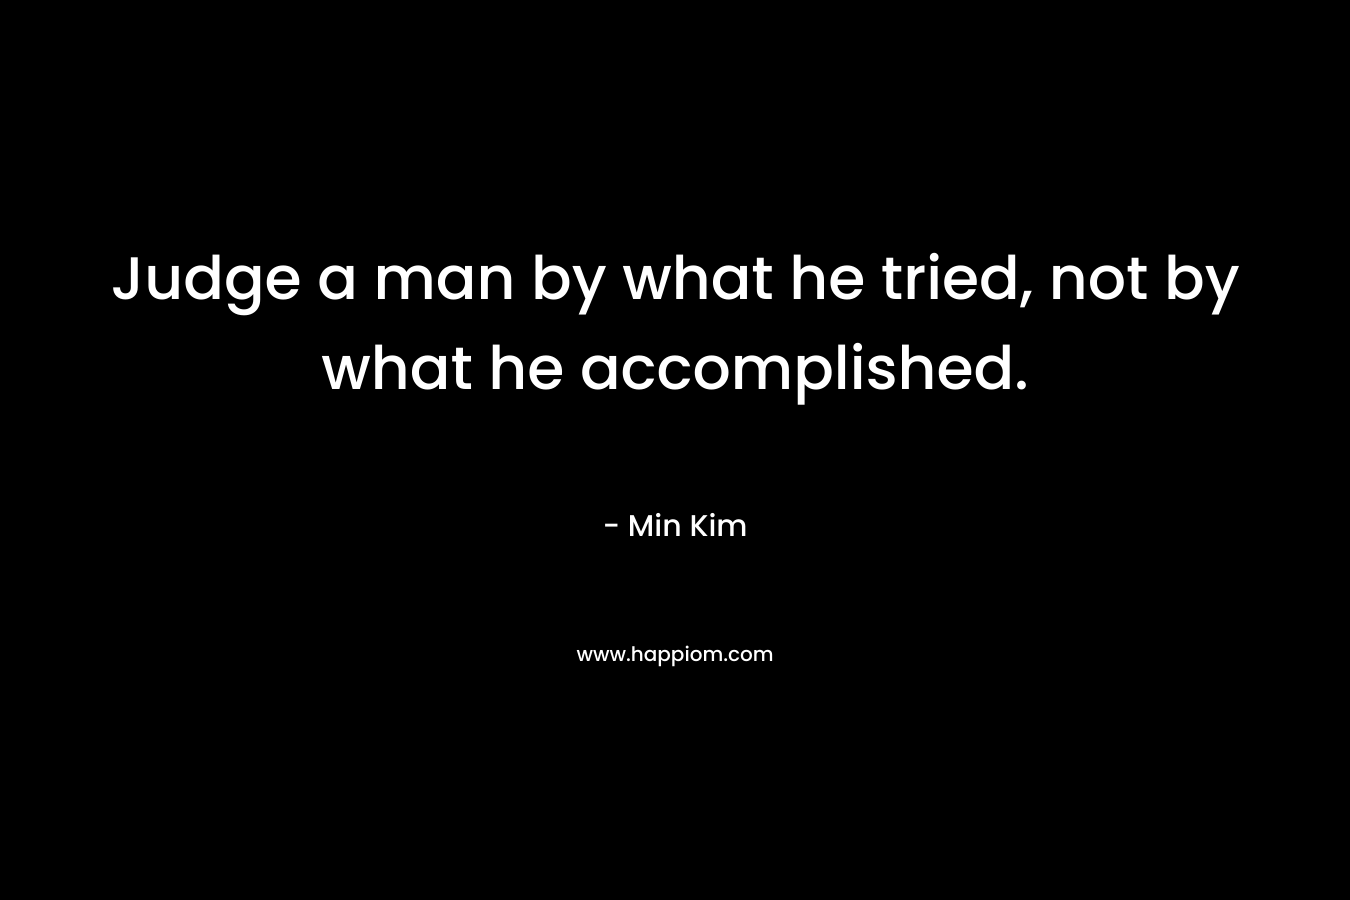 Judge a man by what he tried, not by what he accomplished.